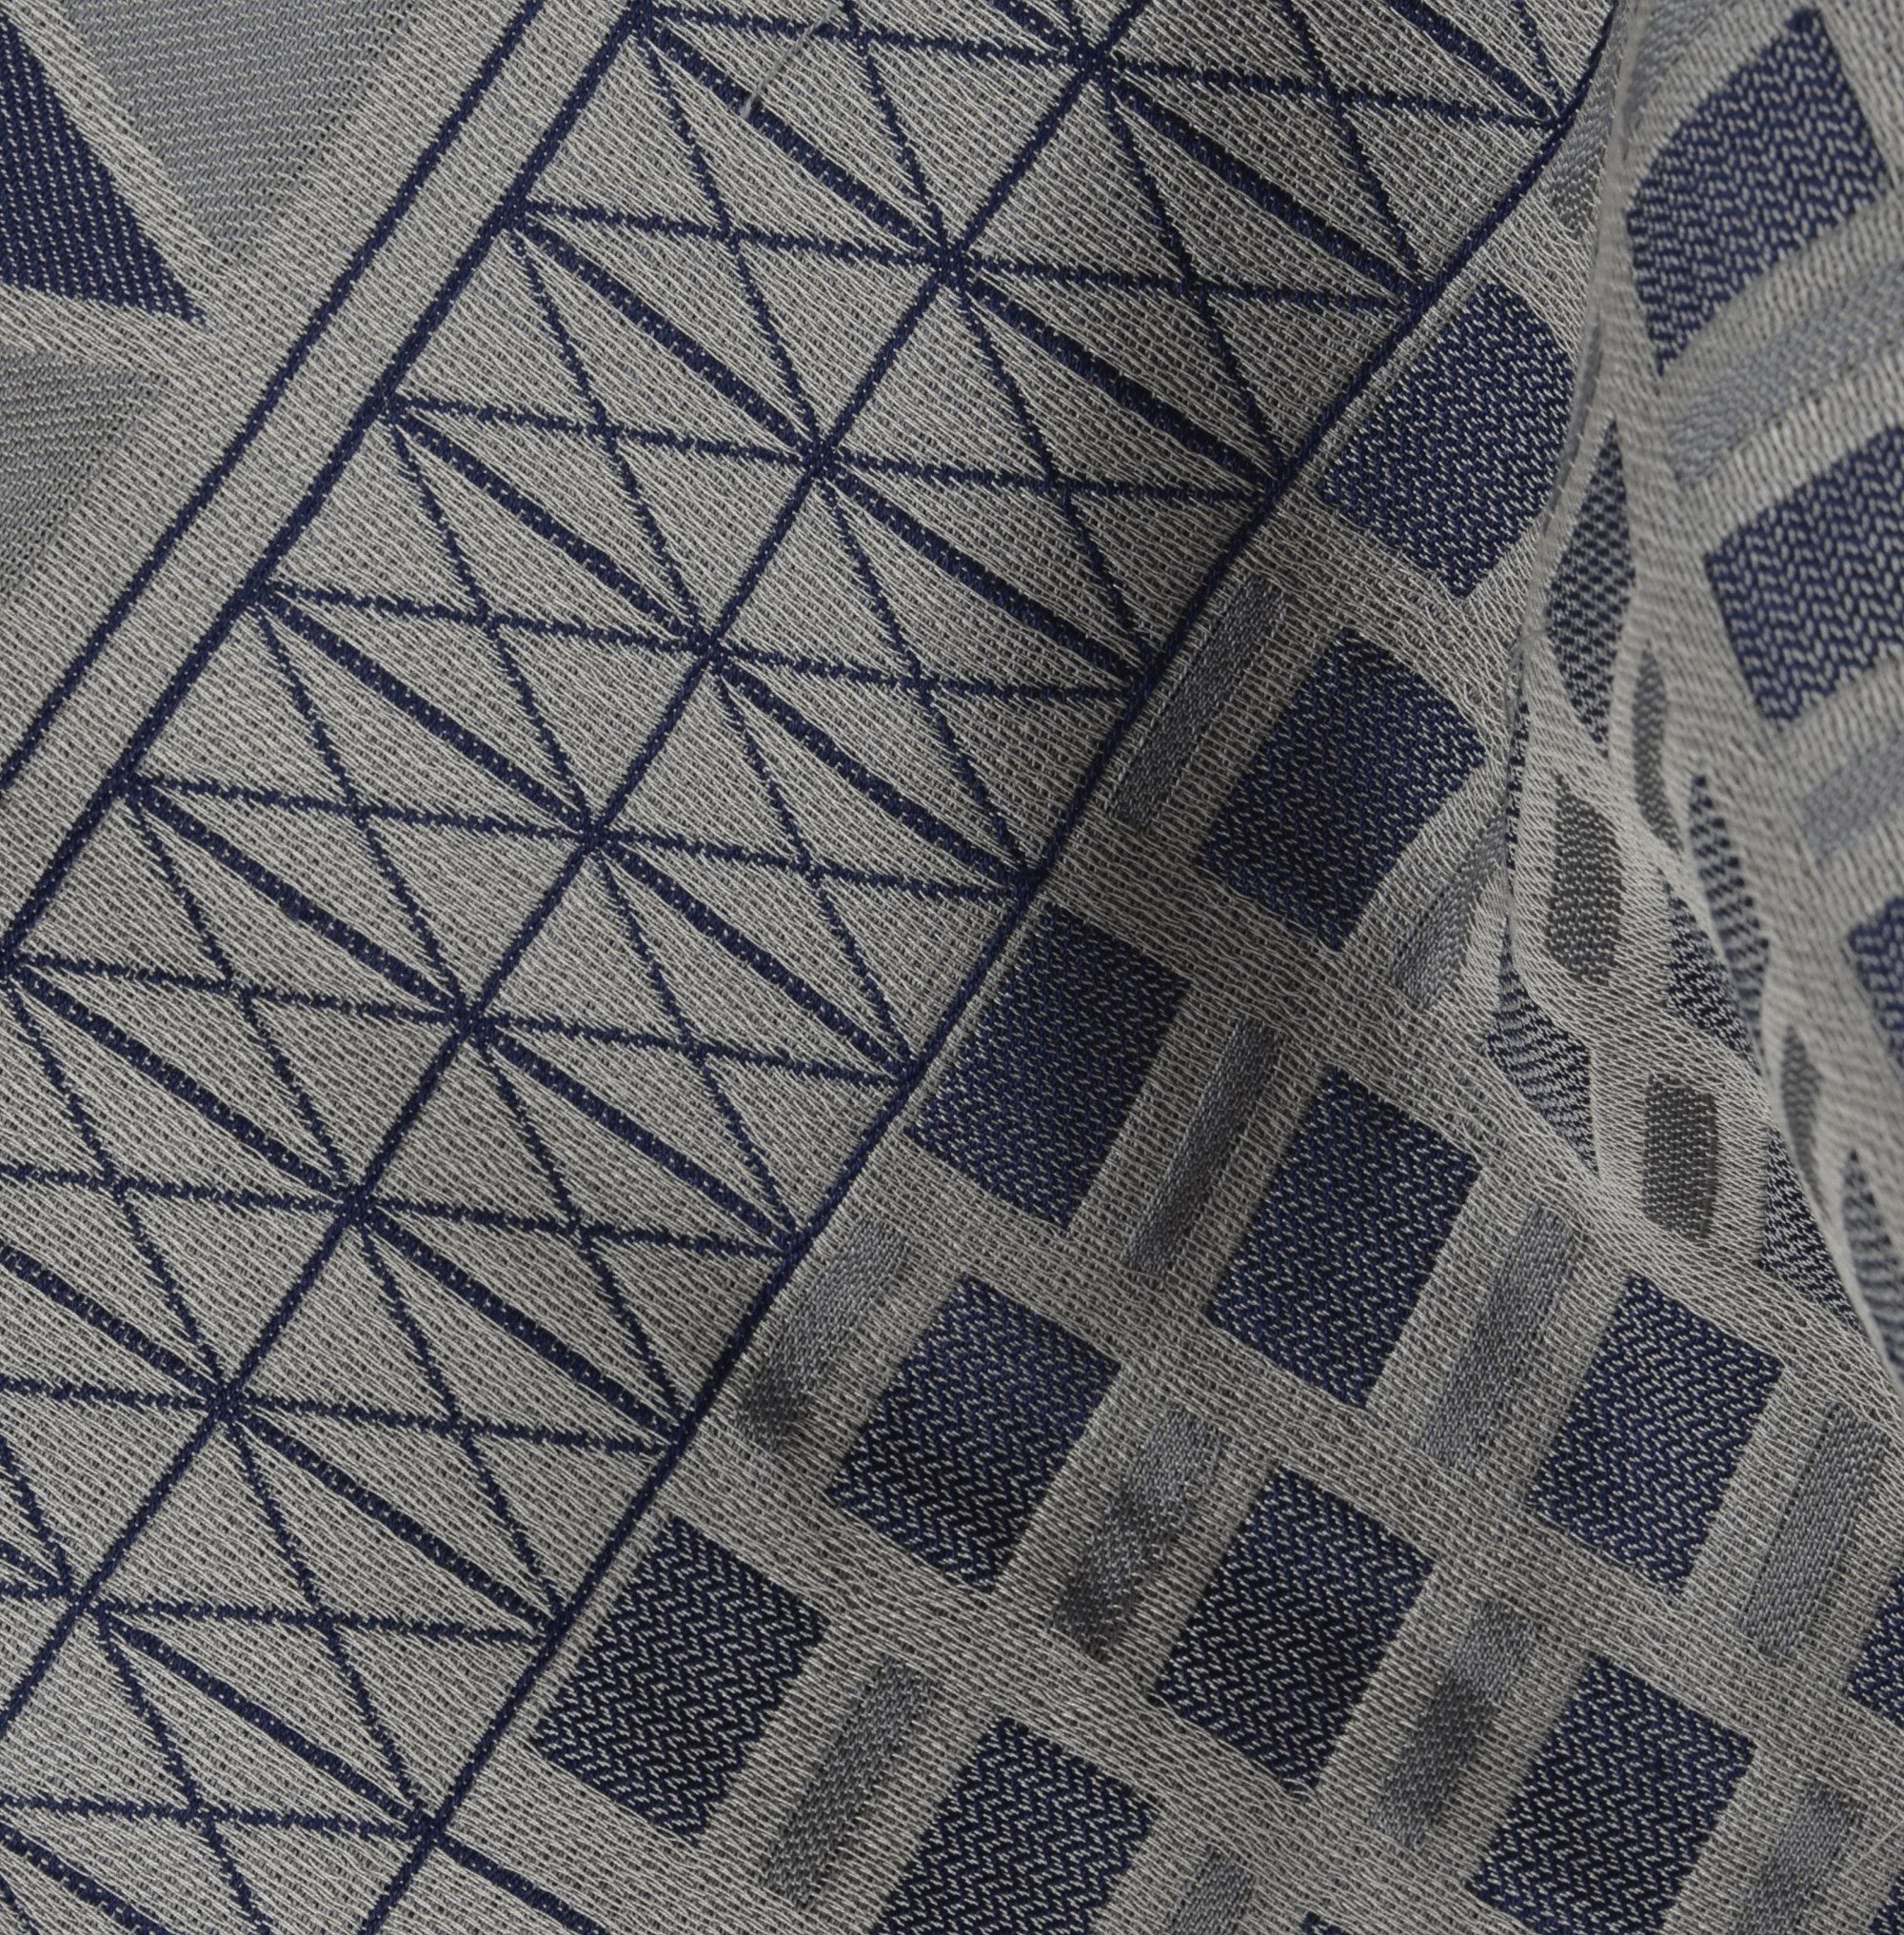 Cotton Jaquard weave inspired by pier structures